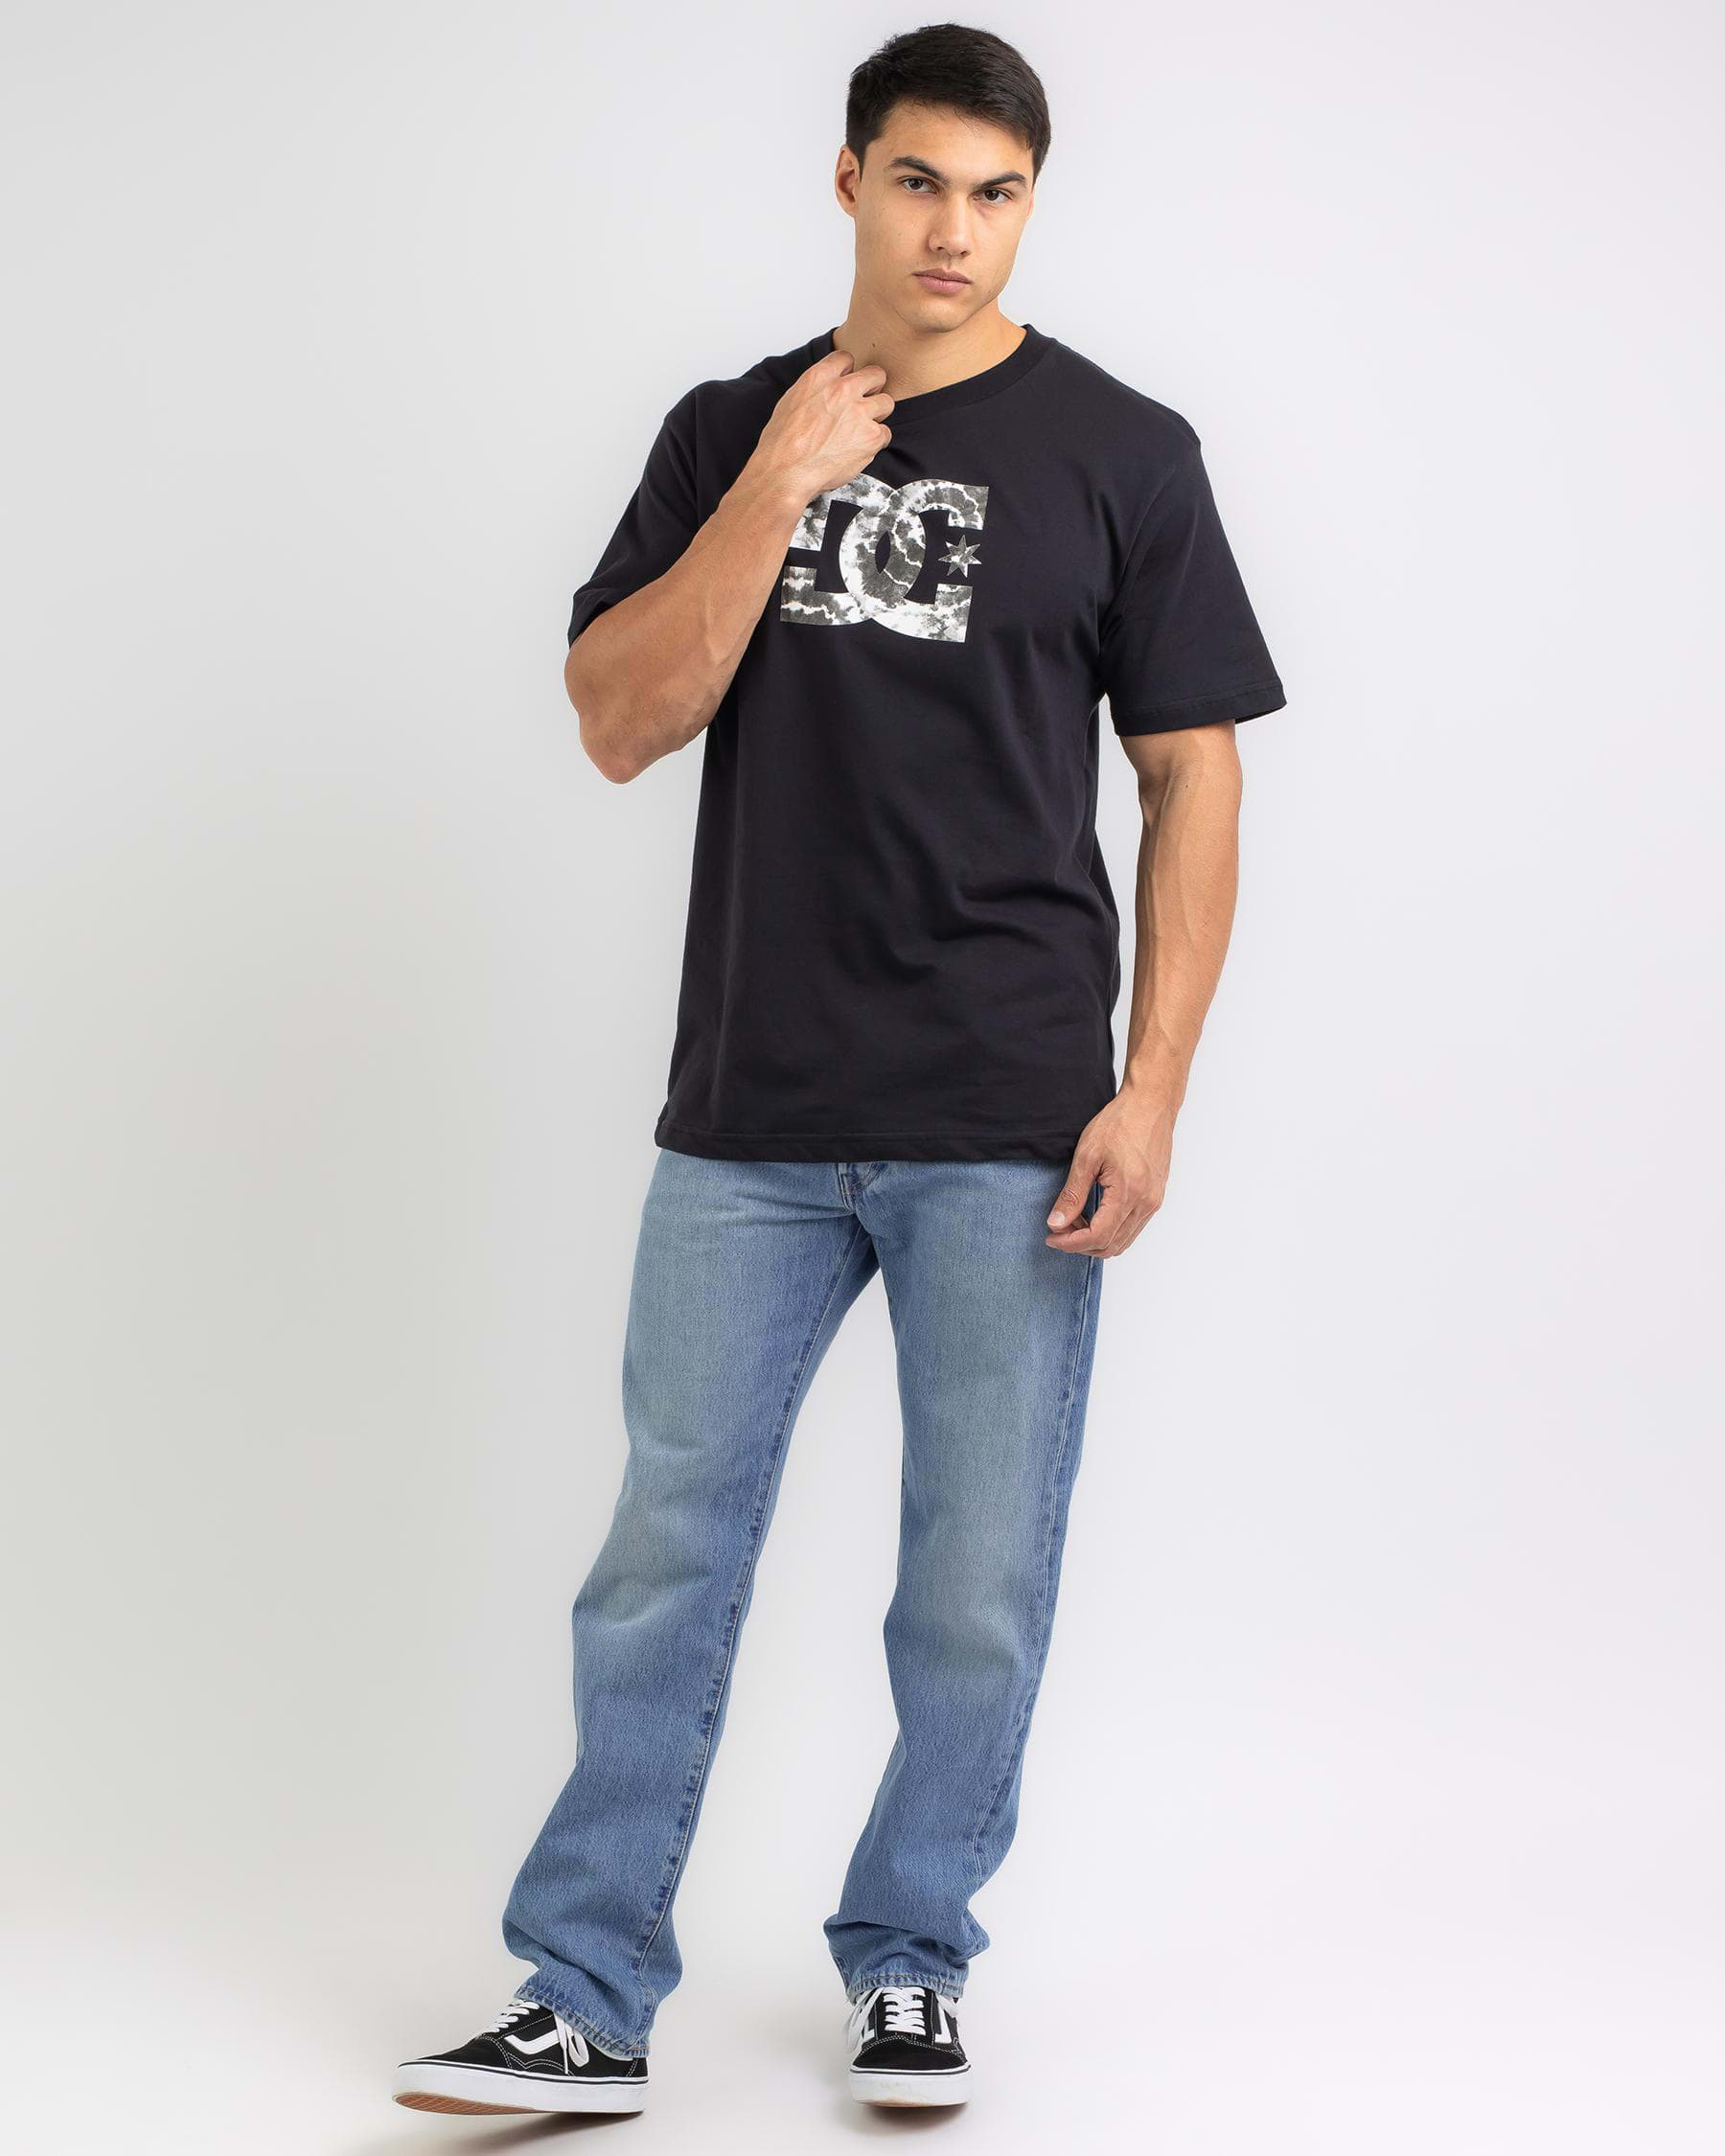 T-Shirt FREE* States Shipping Shoes Fill & - United Returns DC Beach In City Star DC - Easy Black